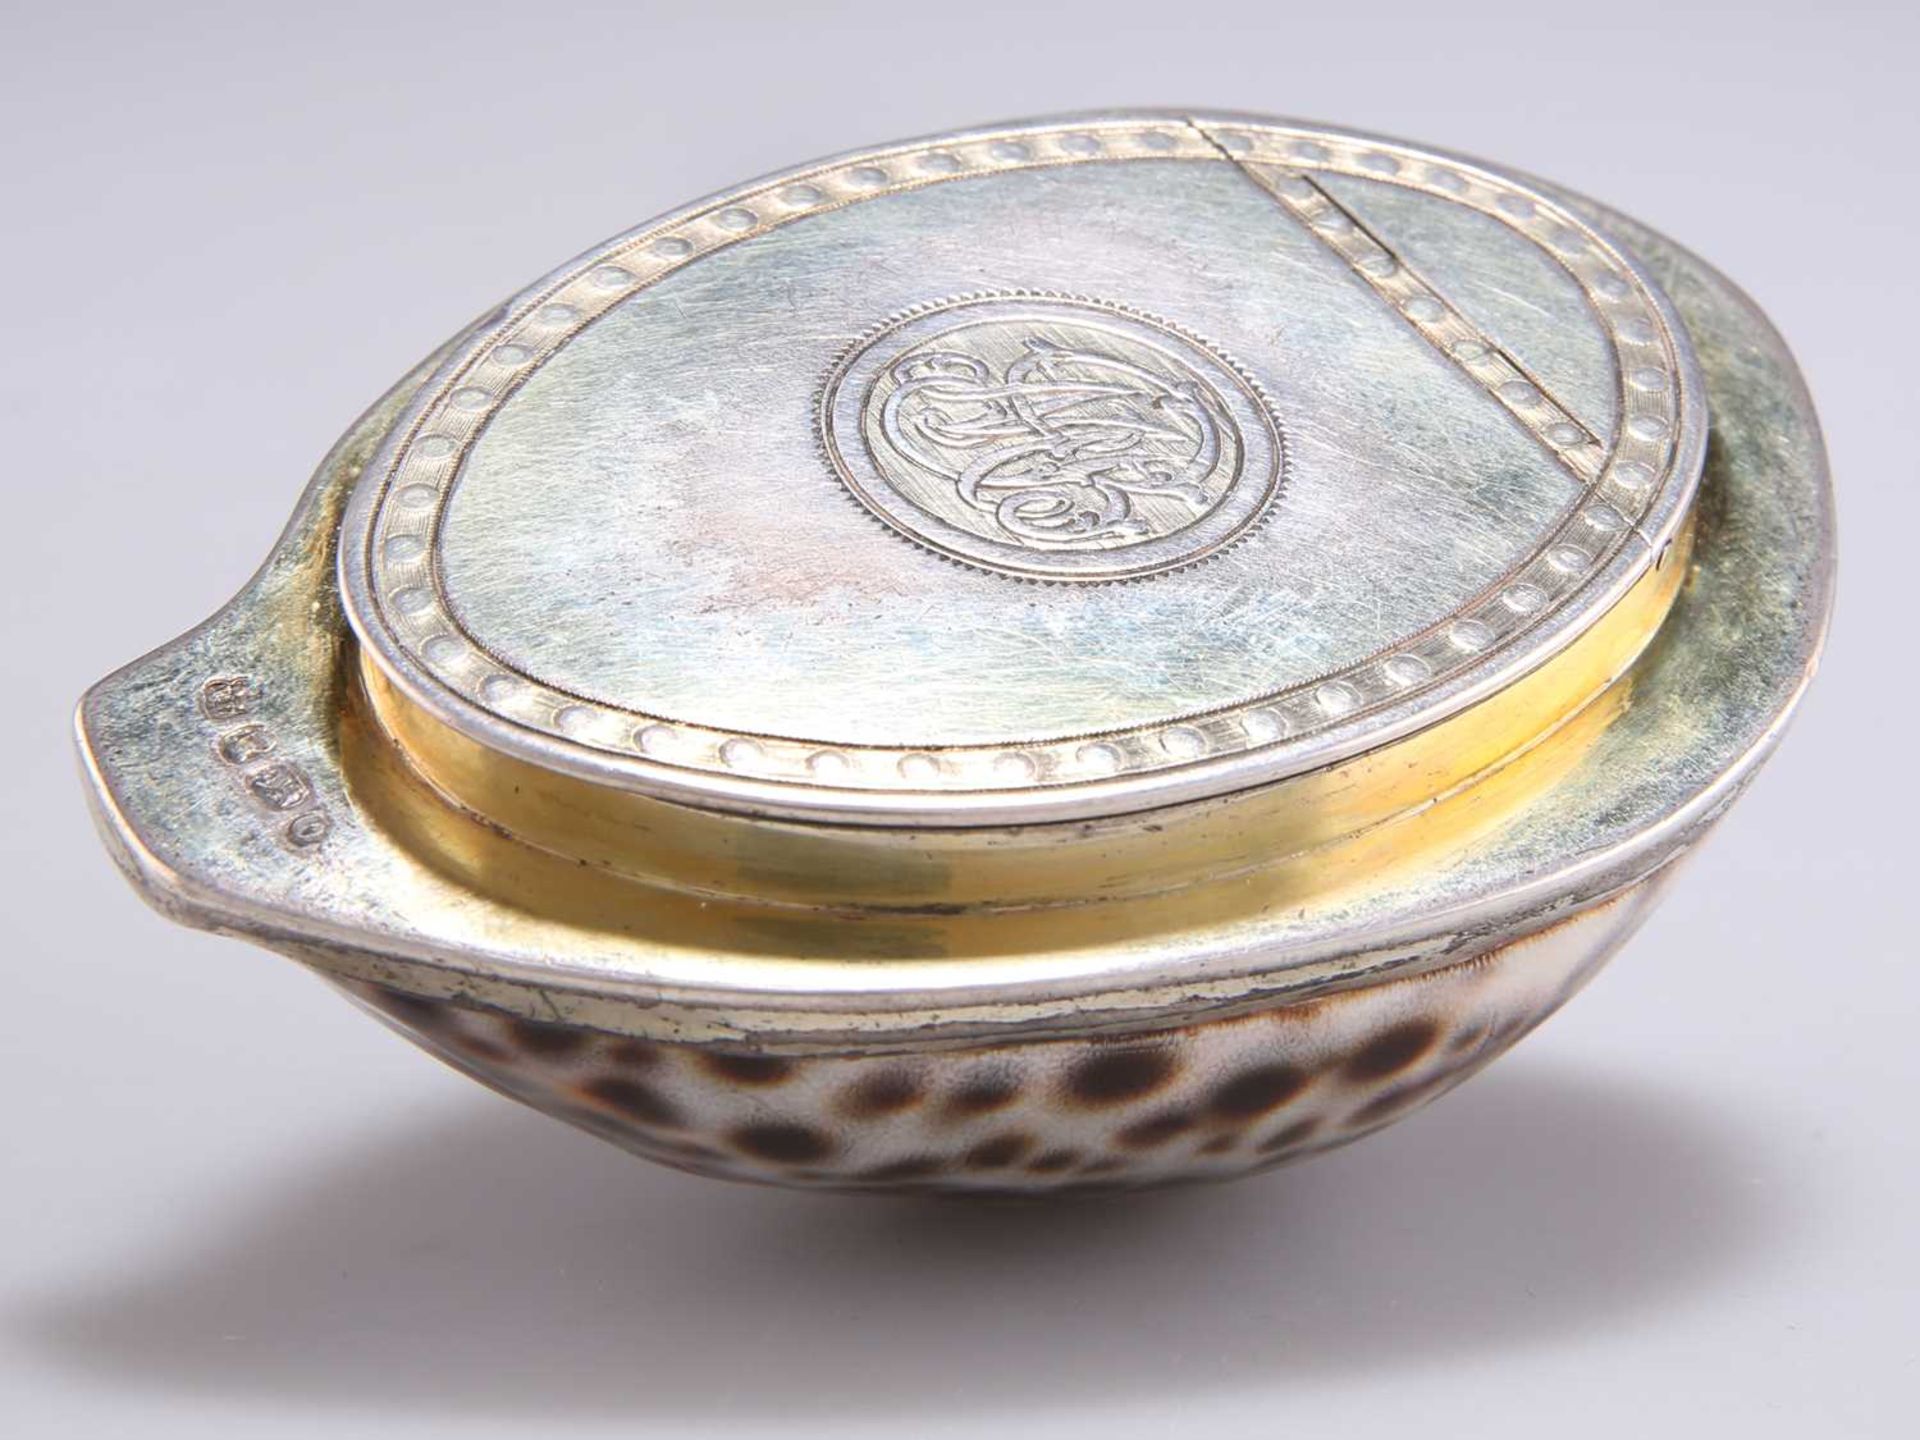 A GEORGE III SILVER-GILT MOUNTED COWRIE SHELL SNUFF BOX - Image 2 of 4